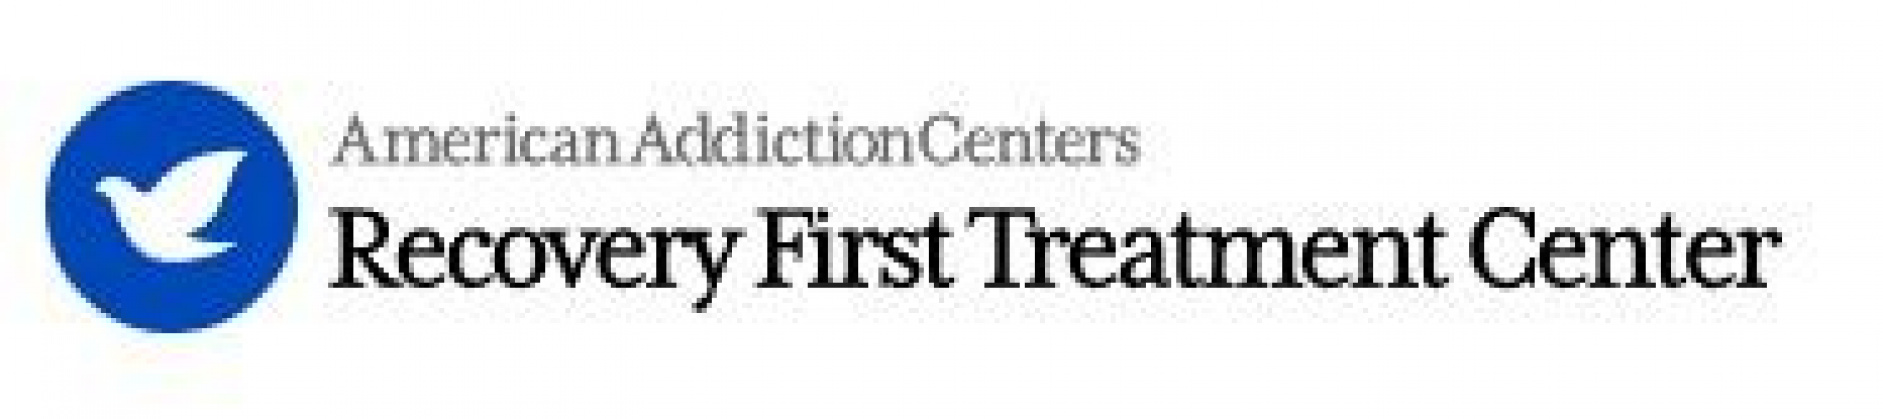 9543887790 Recovery First Treatment Center